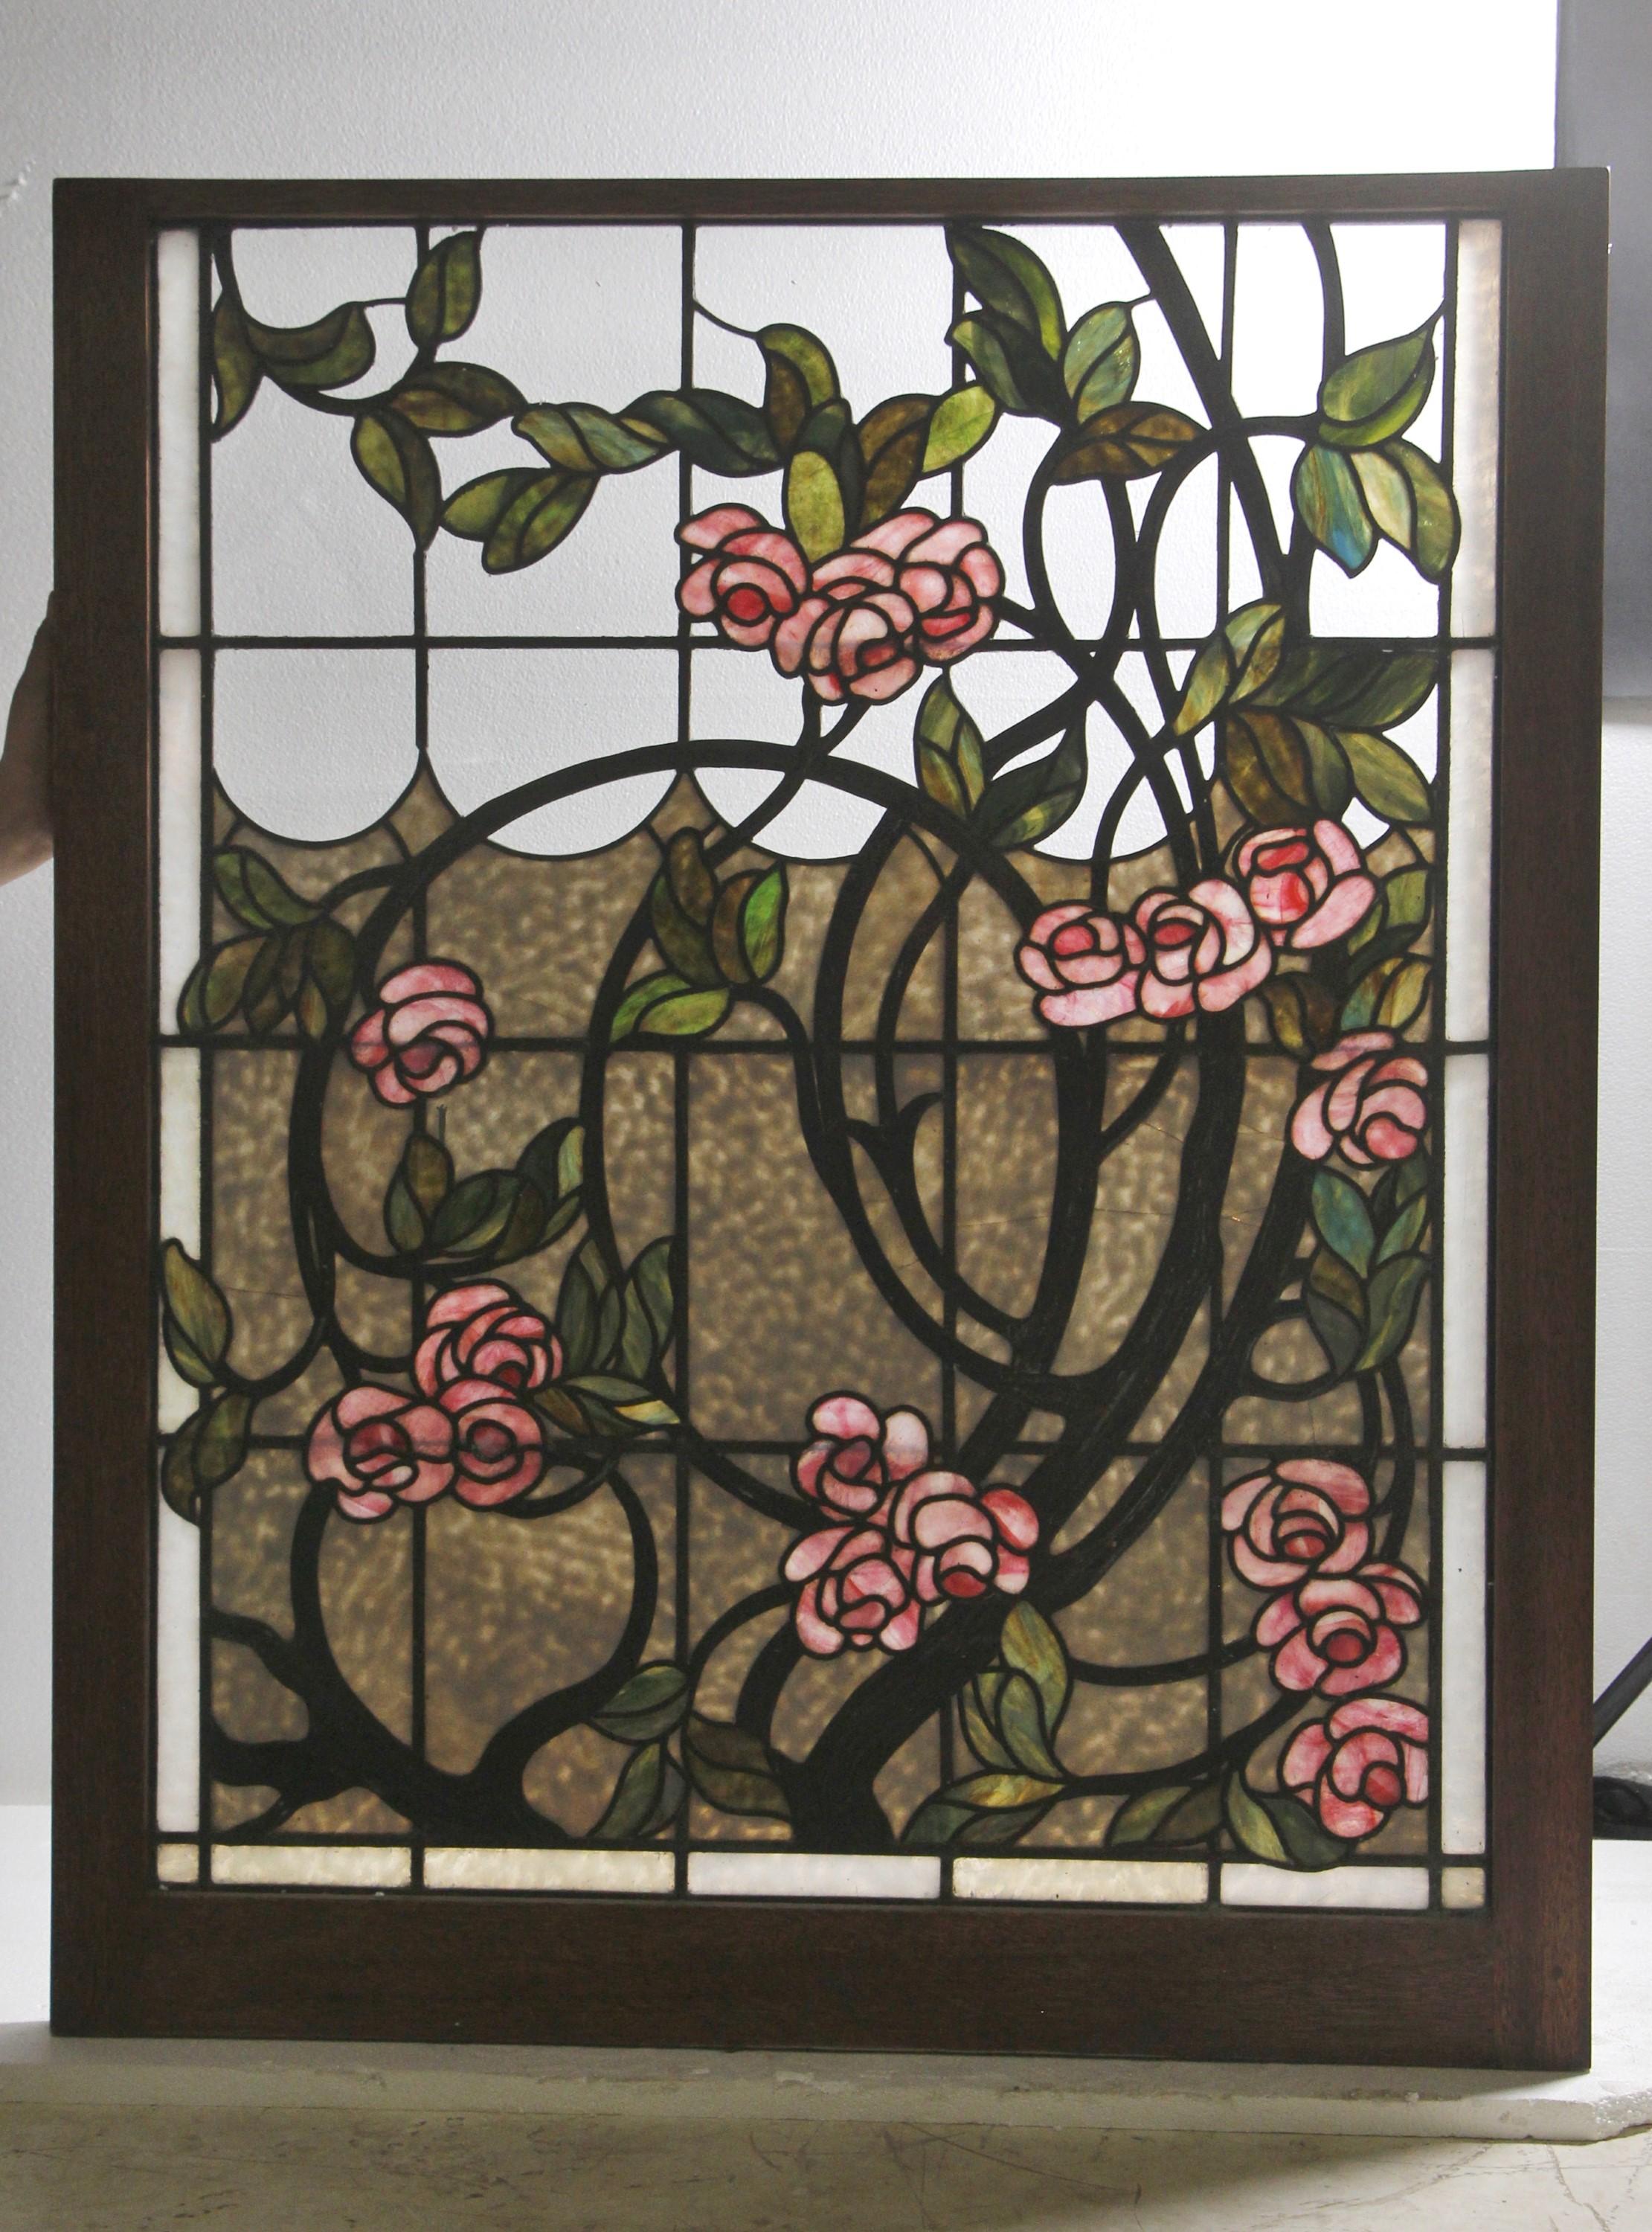 Set (top and bottom) of 1880s stained glass windows done in a vibrant blue lake, pink water lilies, green leaves, and black vines design. The bottom part shows the water lilies growing up from the lake and encompass the sky. Both windows are mounted